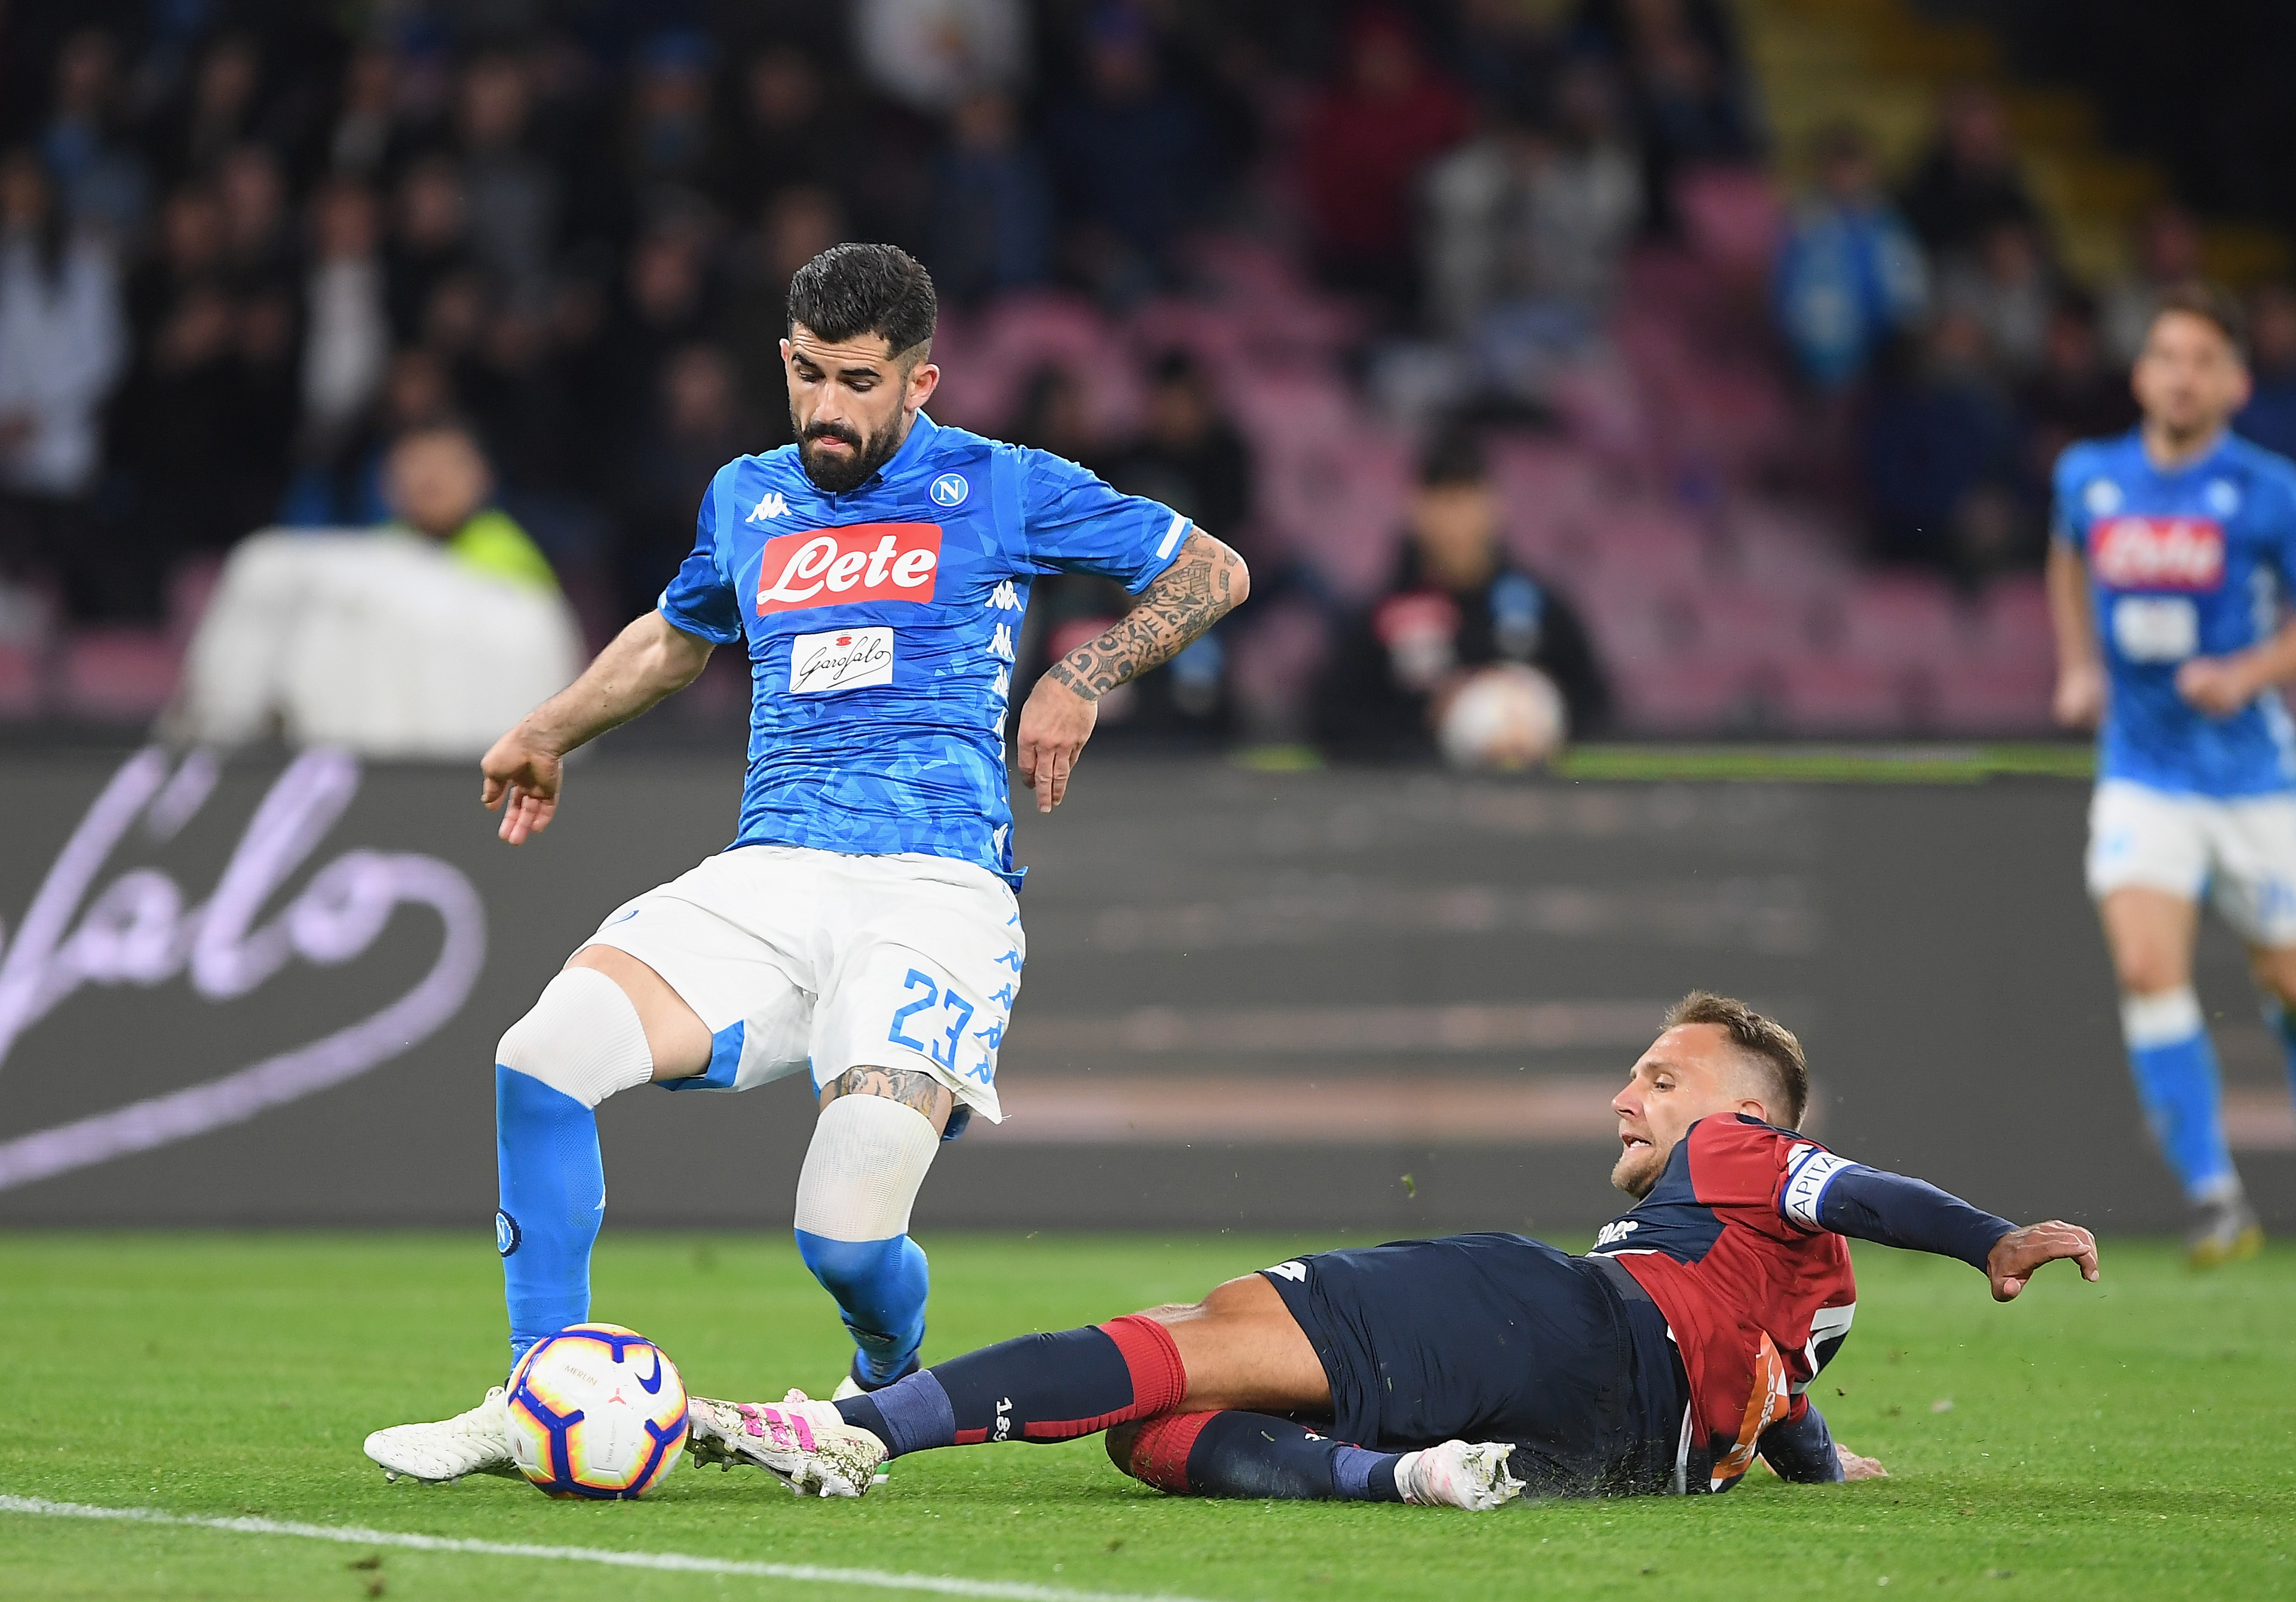 NAPLES, ITALY - APRIL 07: Elseid Hysaj of SSC Napoli vies Domenico Criscito of Genoa CFC during the Serie A match between SSC Napoli and Genoa CFC at Stadio San Paolo on April 7, 2019 in Naples, Italy.  (Photo by Francesco Pecoraro/Getty Images)